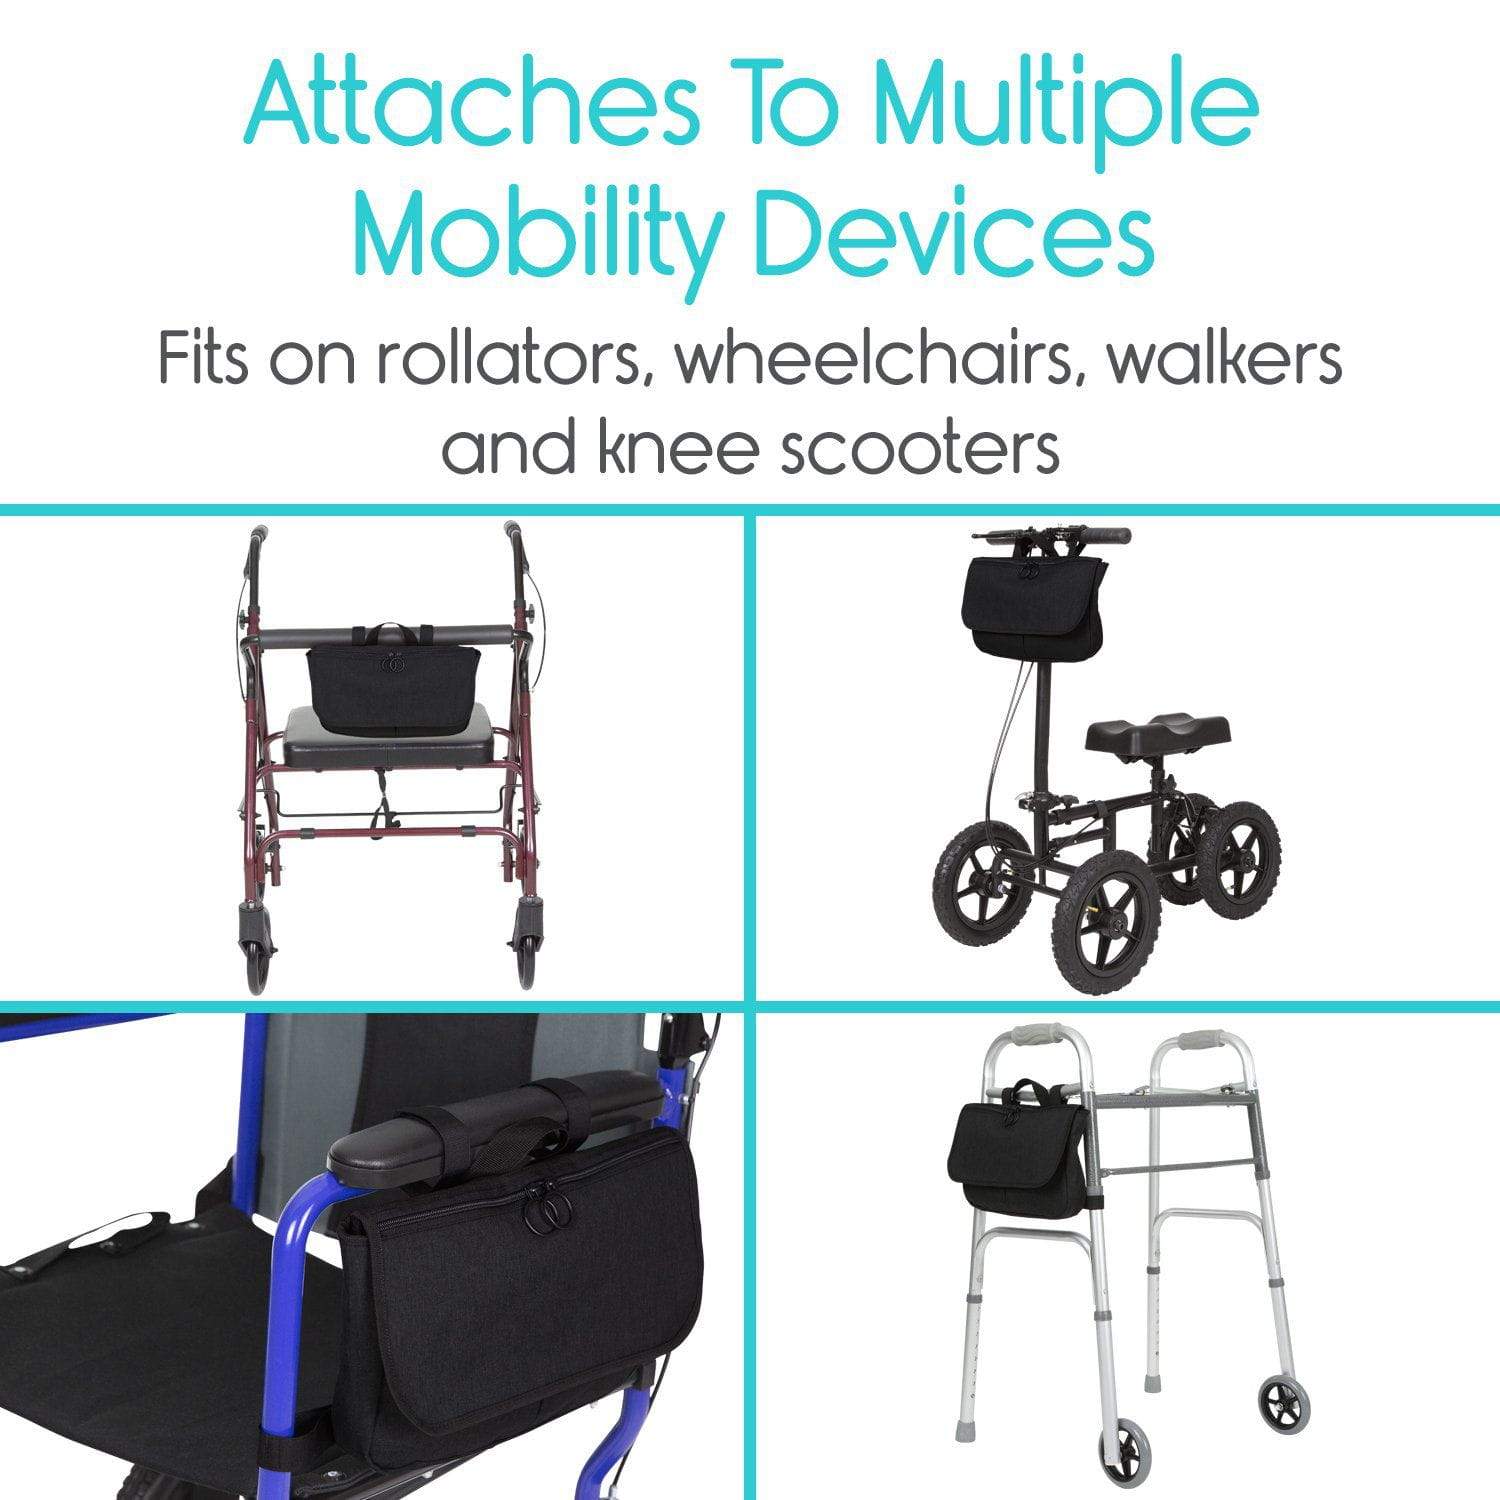 mobility side bag attached on wheelchairs, rollator, scooter from AskSAMIE